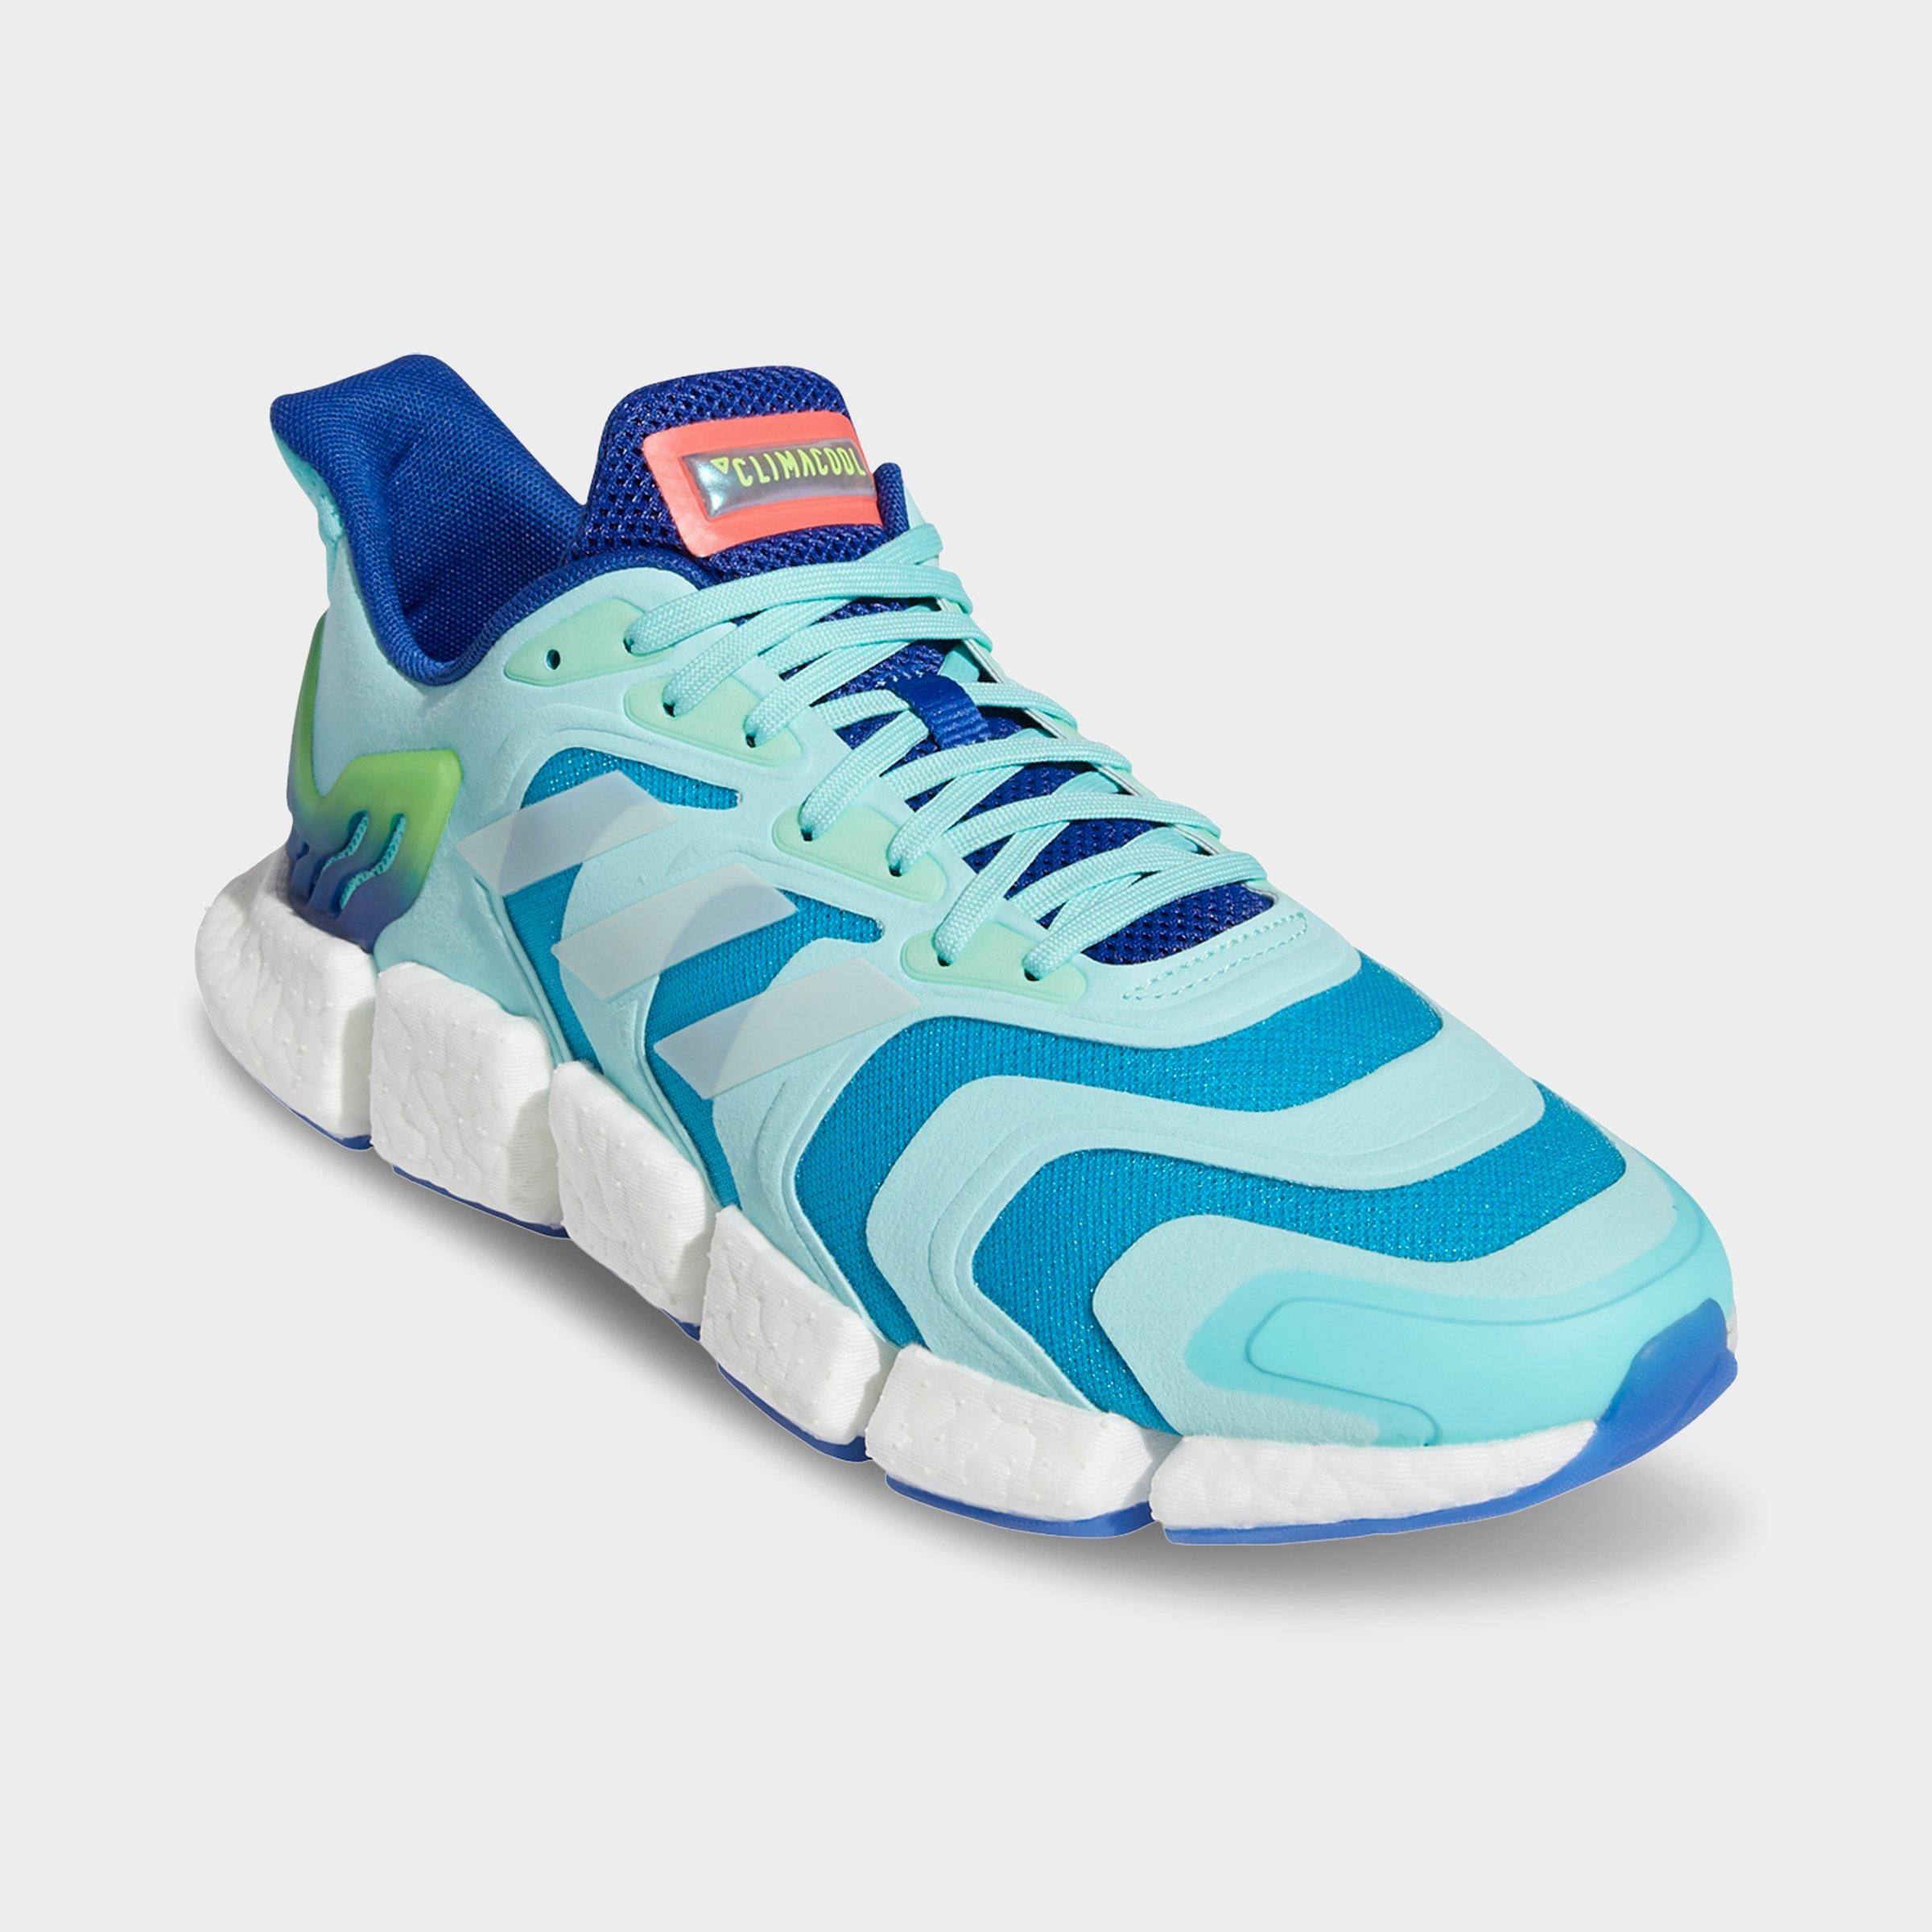 adidas climacool womens shoes